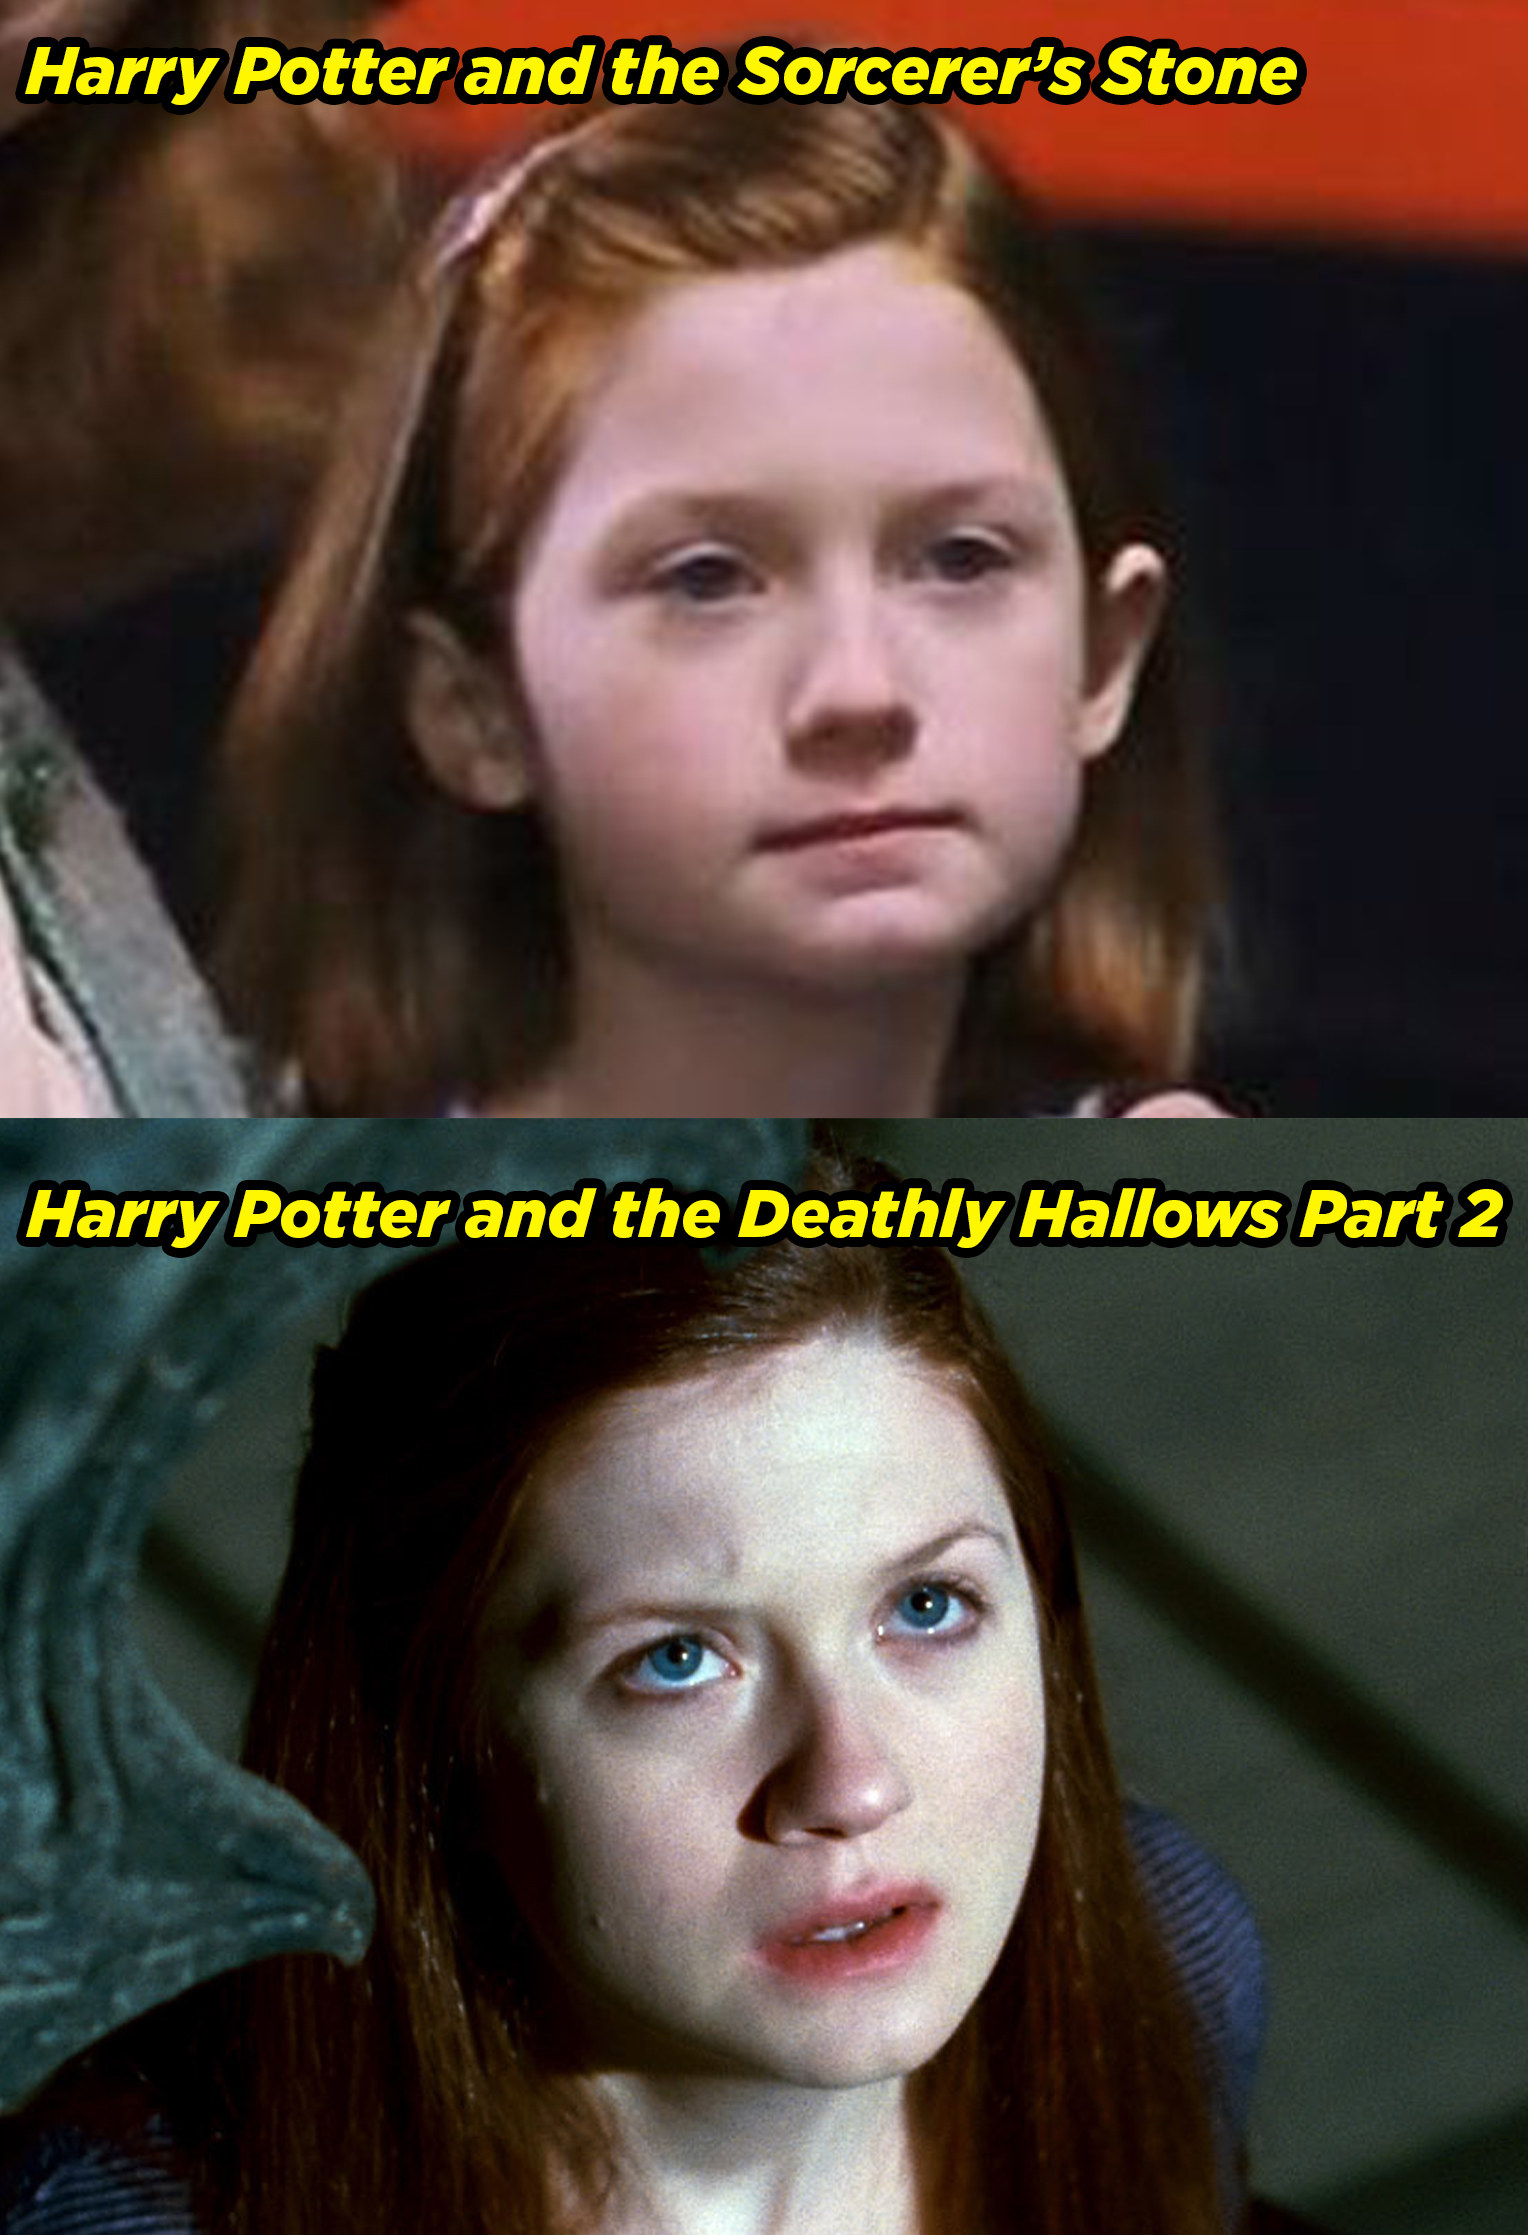 Bonnie Wright in the Sorcerer&#x27;s Stone and Deathly Hallows Part 2